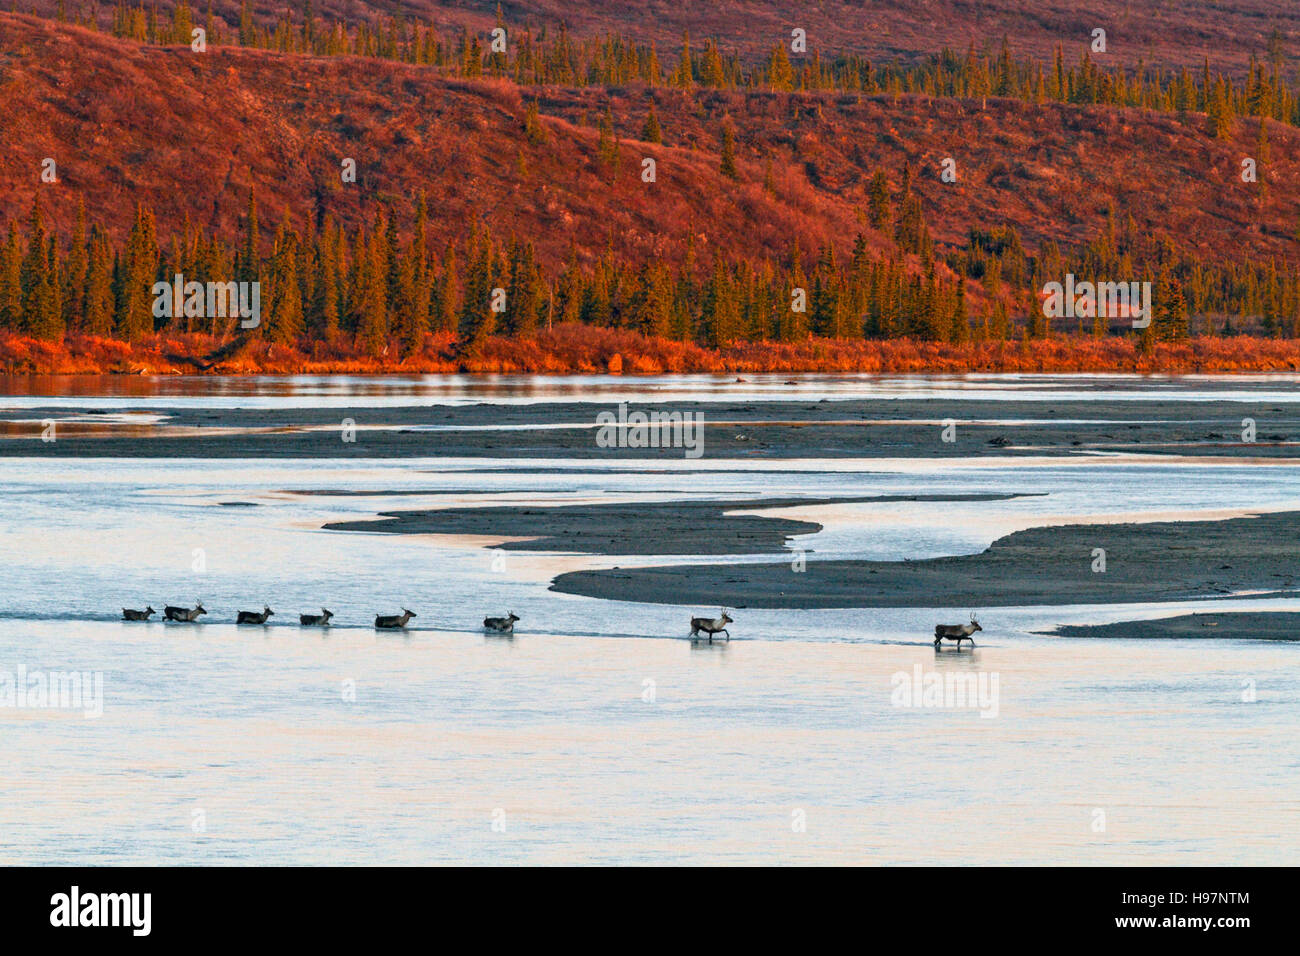 Caribou crossing the Susitna River at sunset during the autumn rut. Stock Photo